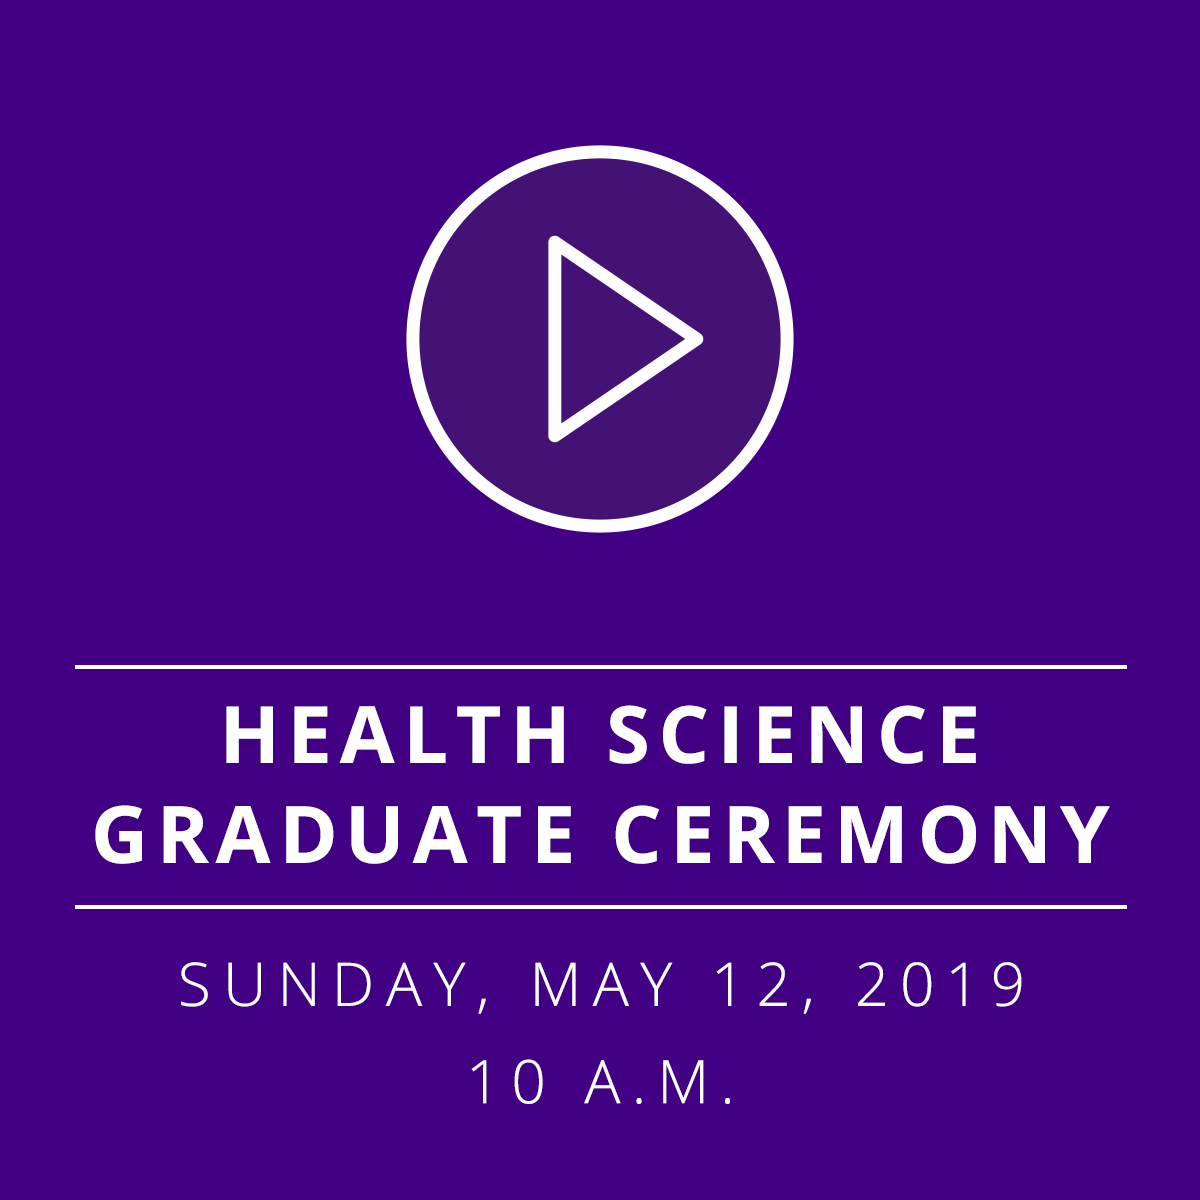 Health Sciences Graduate Commencement Ceremony - Sunday, May 12, 2019 - 10 a.m.